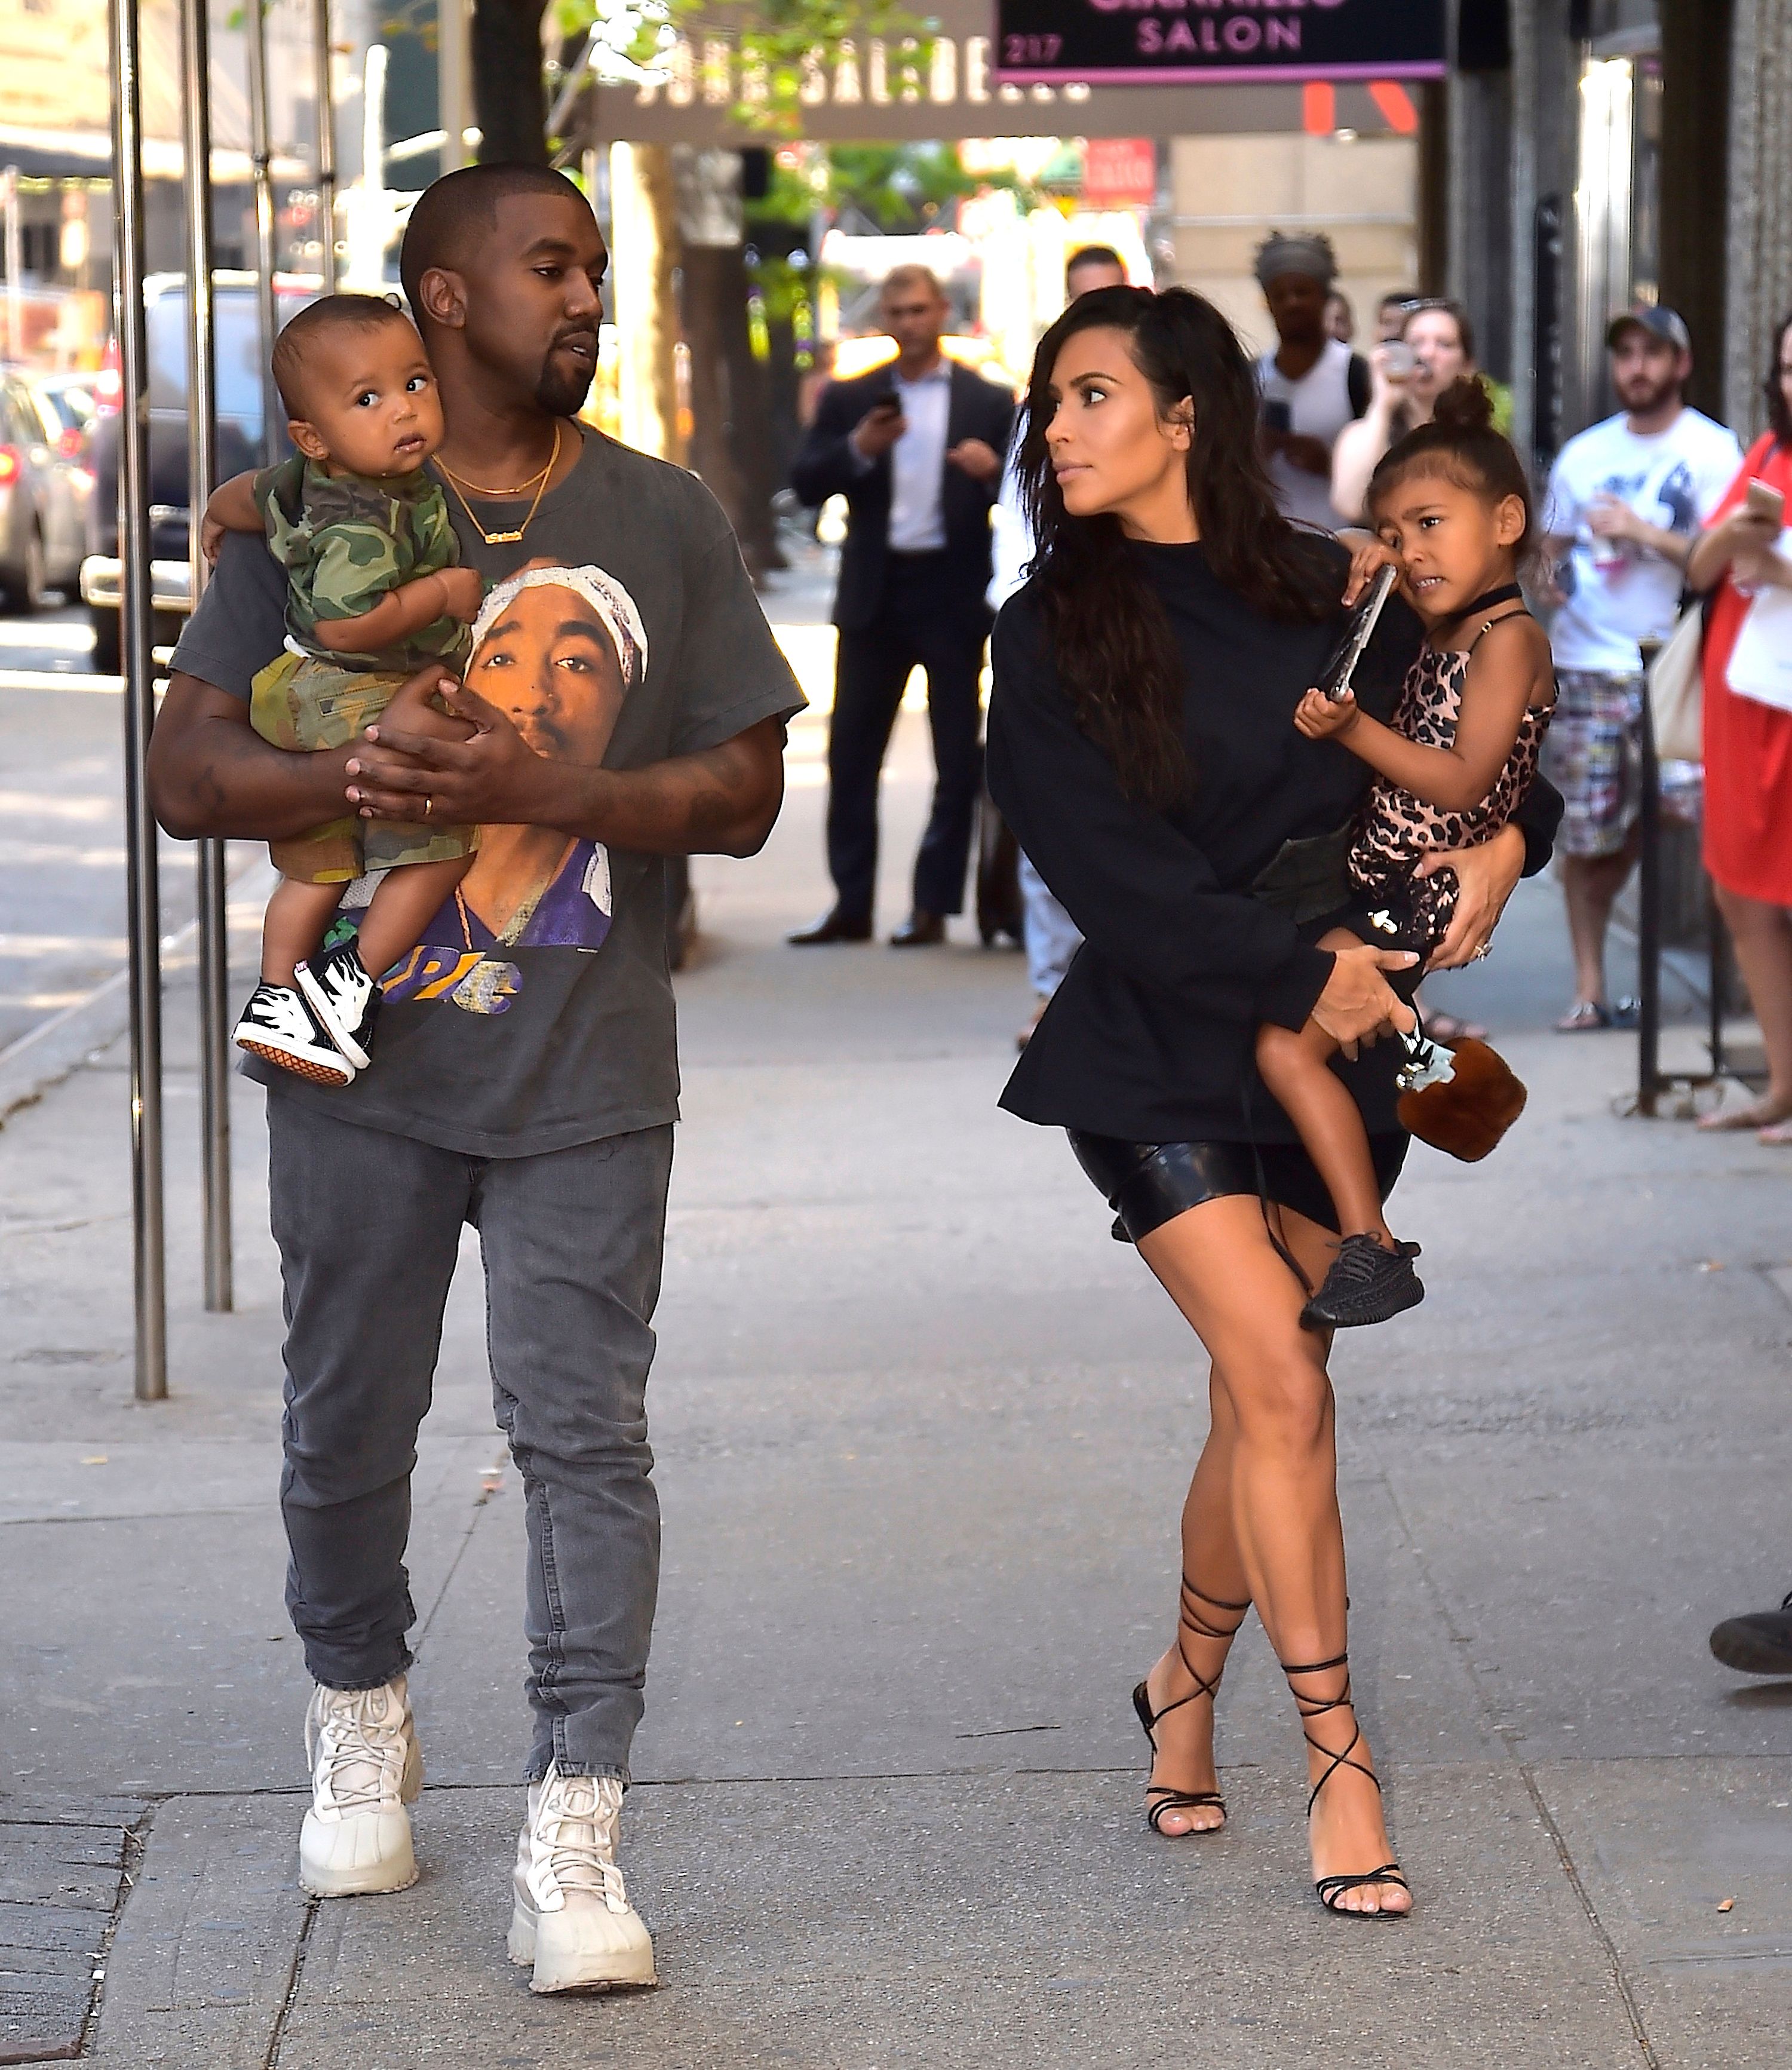 Kanye West and Kim Kardashian with North West and Saint West walking in the Upper East Side on August 29, 2016 | Photo: Getty Images